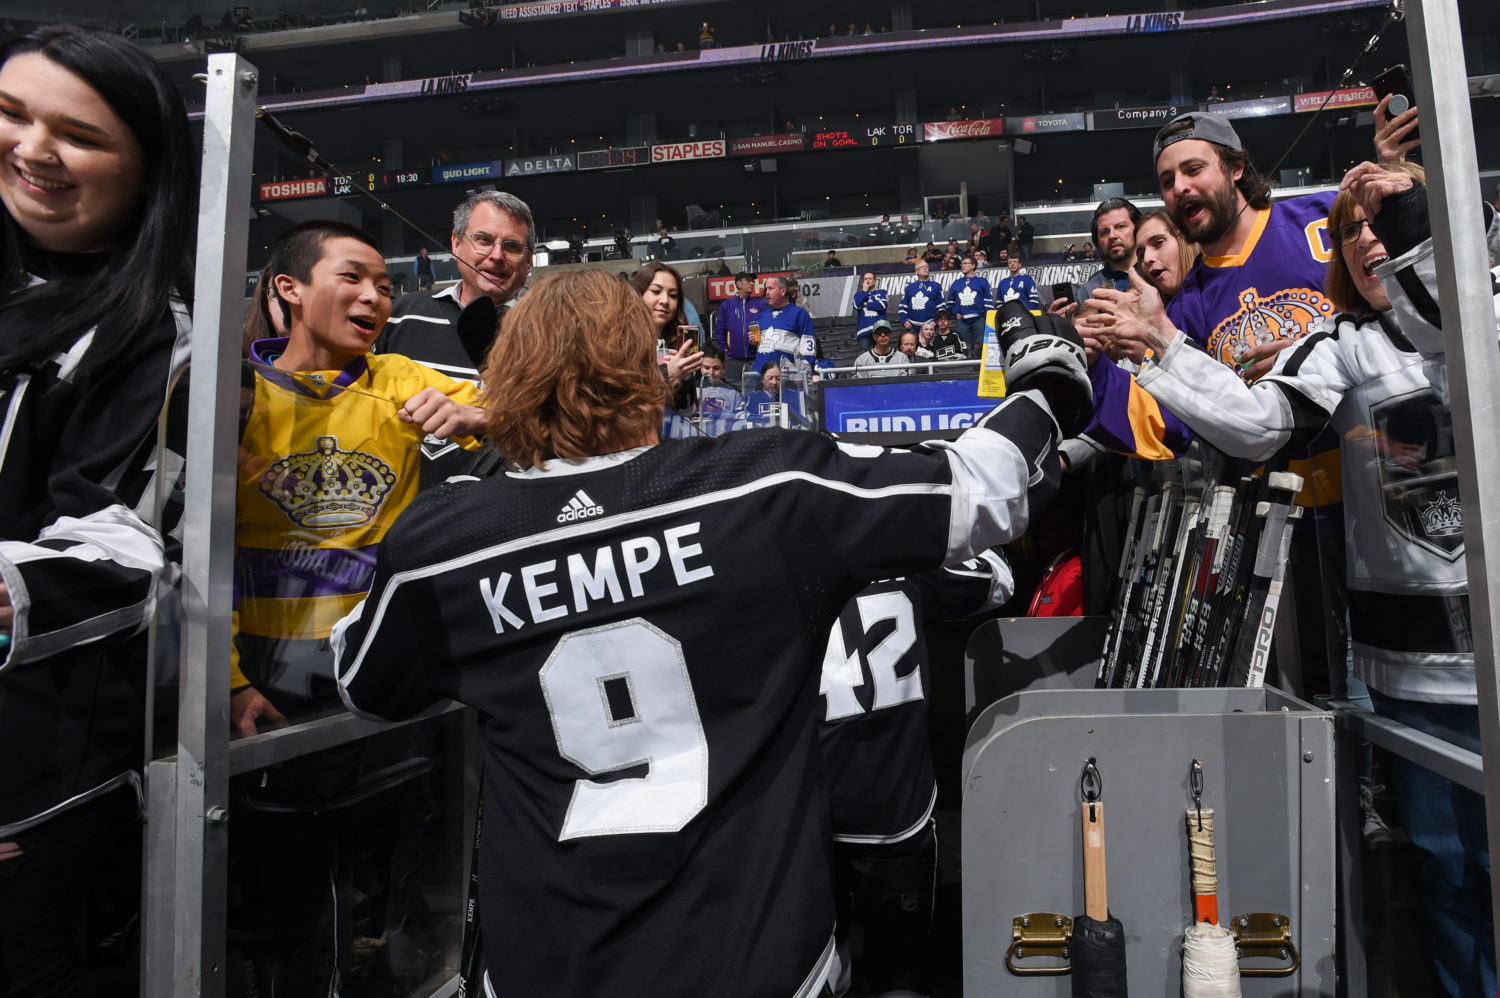 What it's like returning to arenas: A night at Staples Center